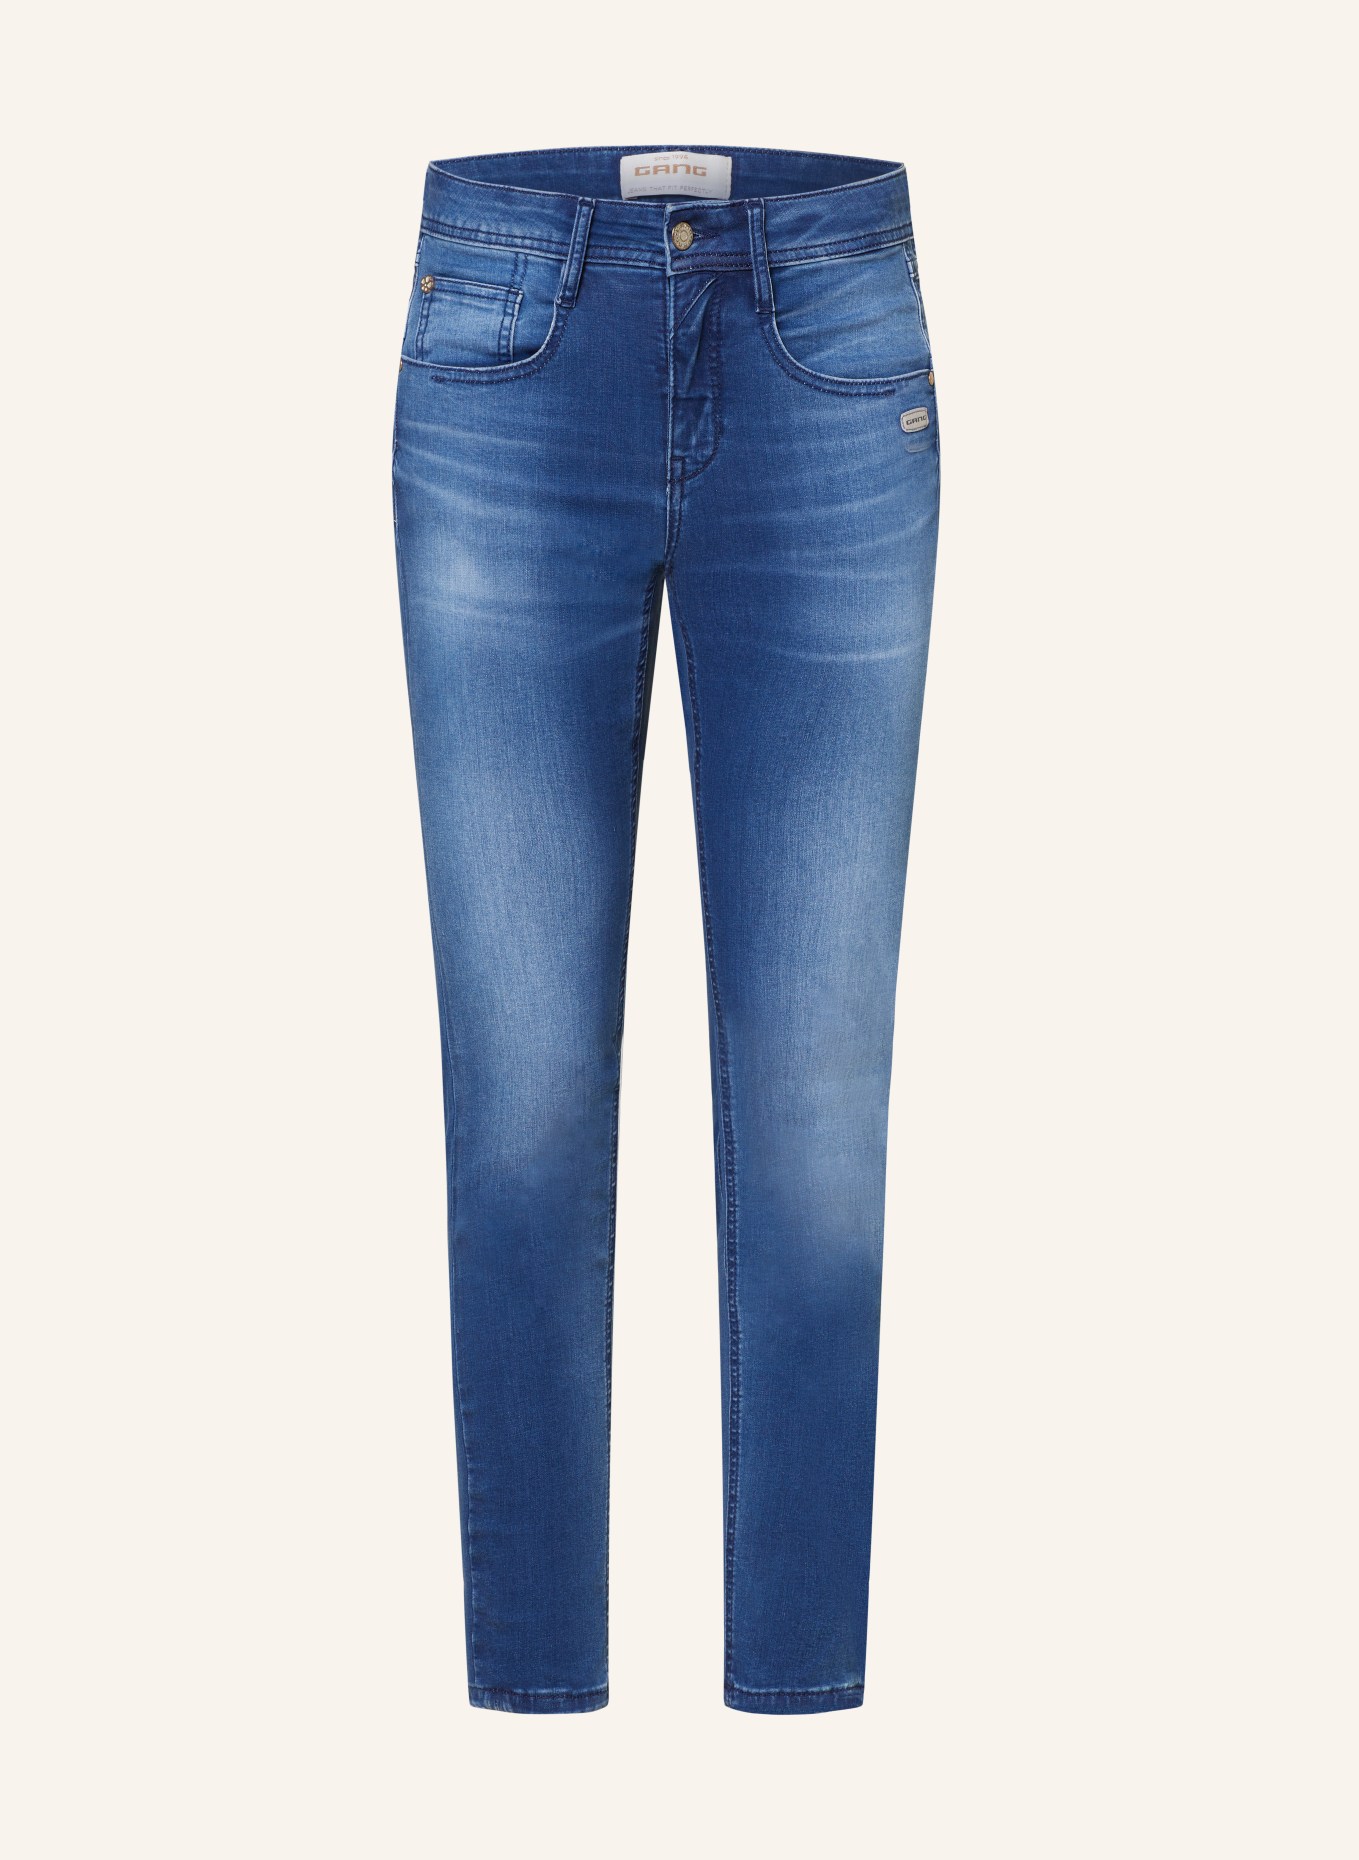 GANG Jeans AMELIE, Farbe: 7760 clam blue (Bild 1)